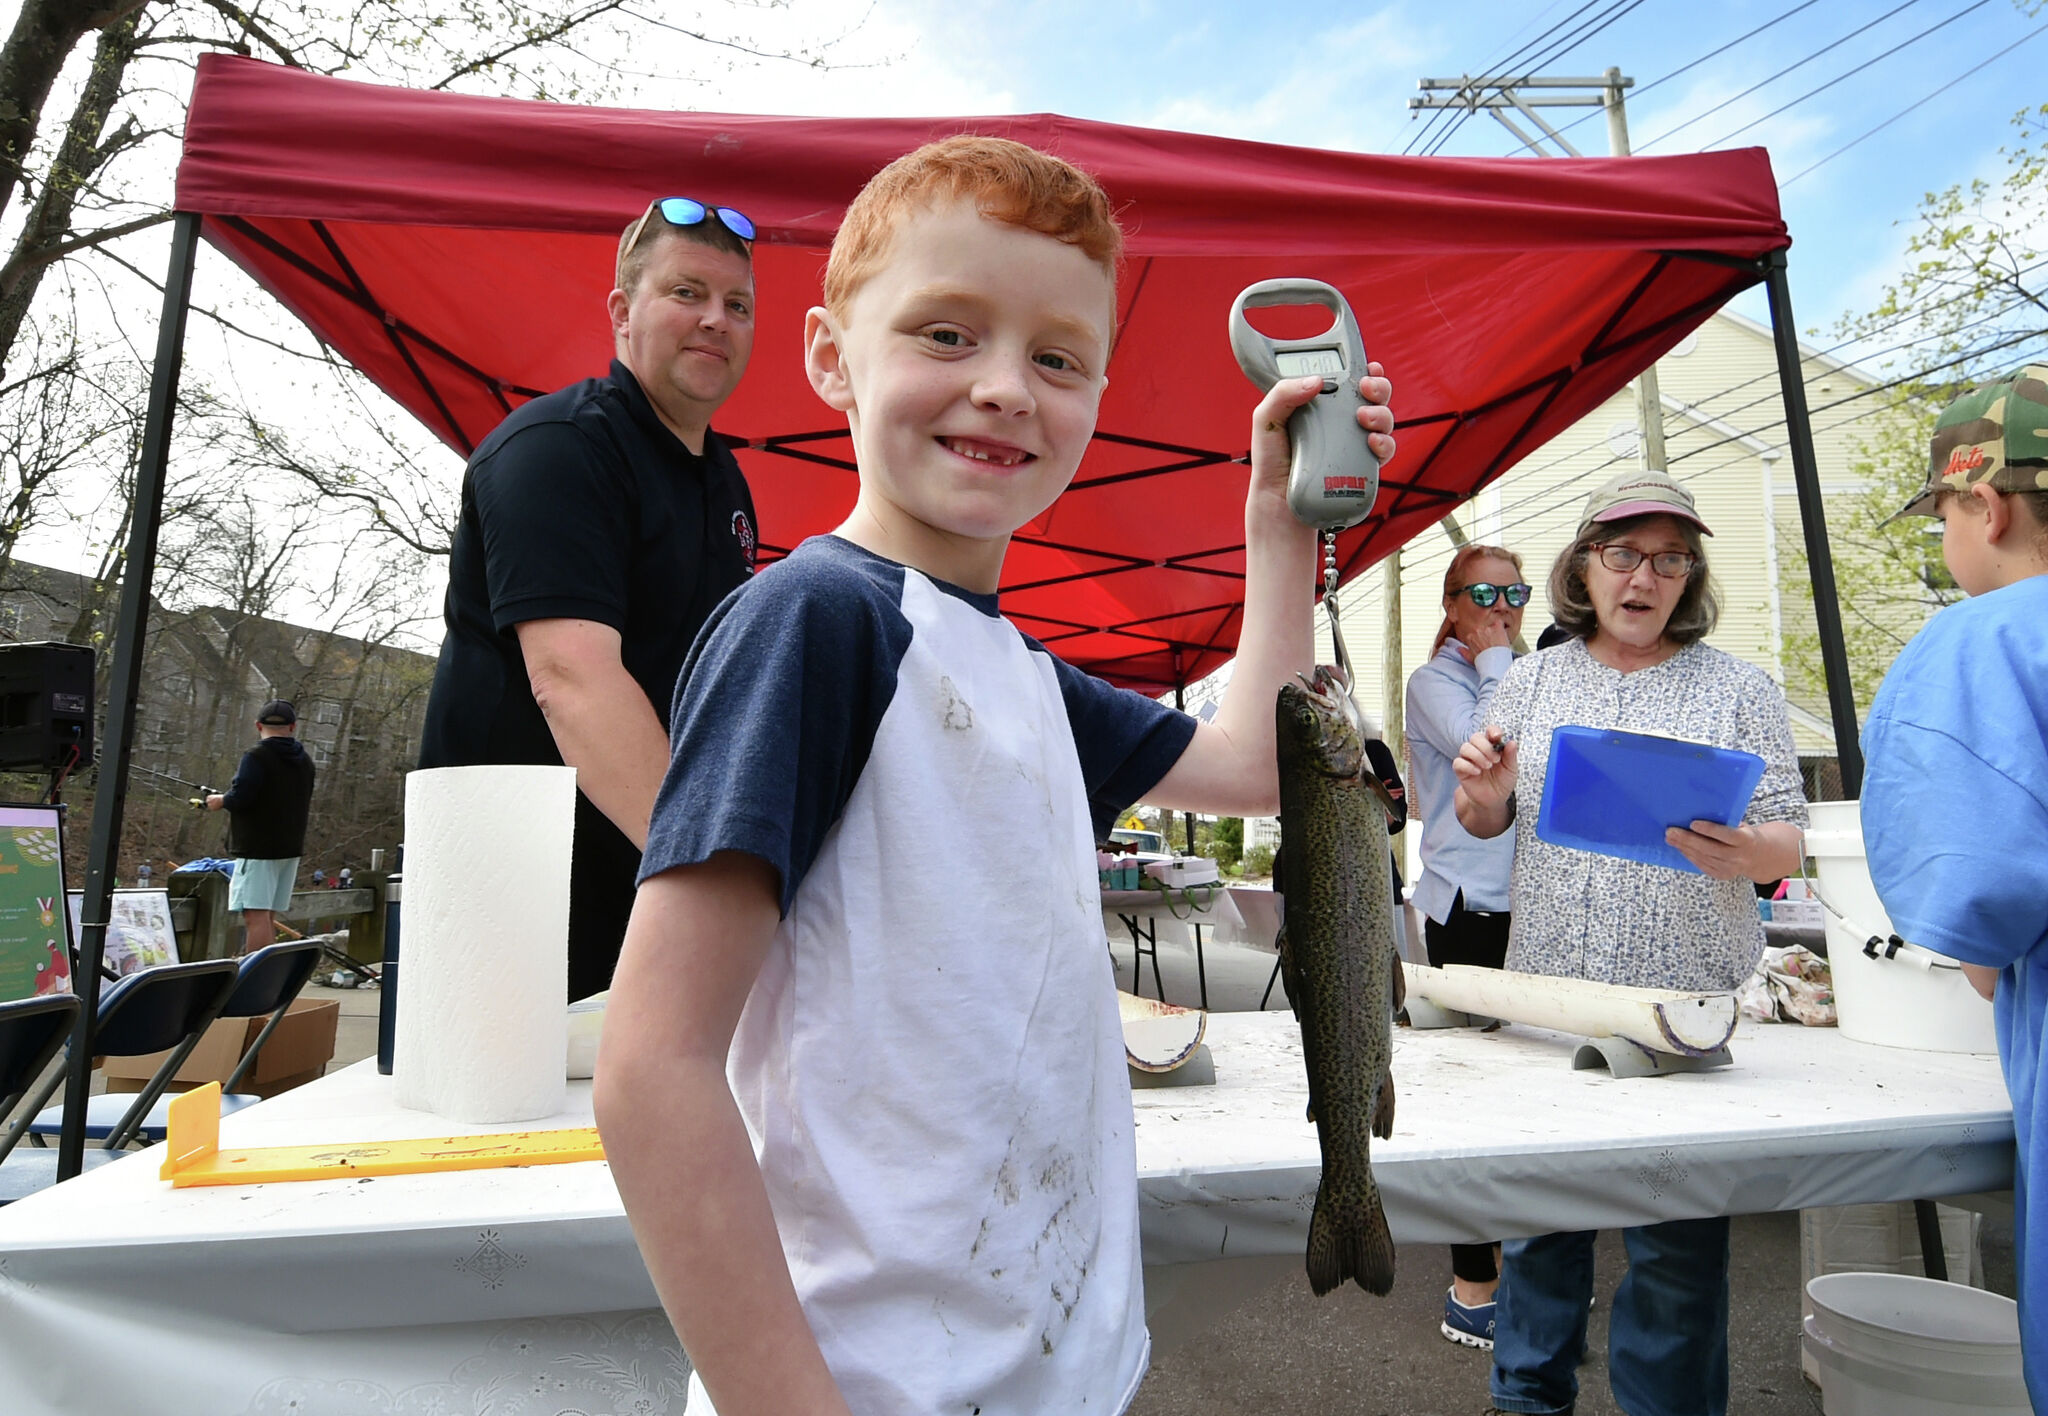 In Photos: Fishing derby in New Canaan brings out families